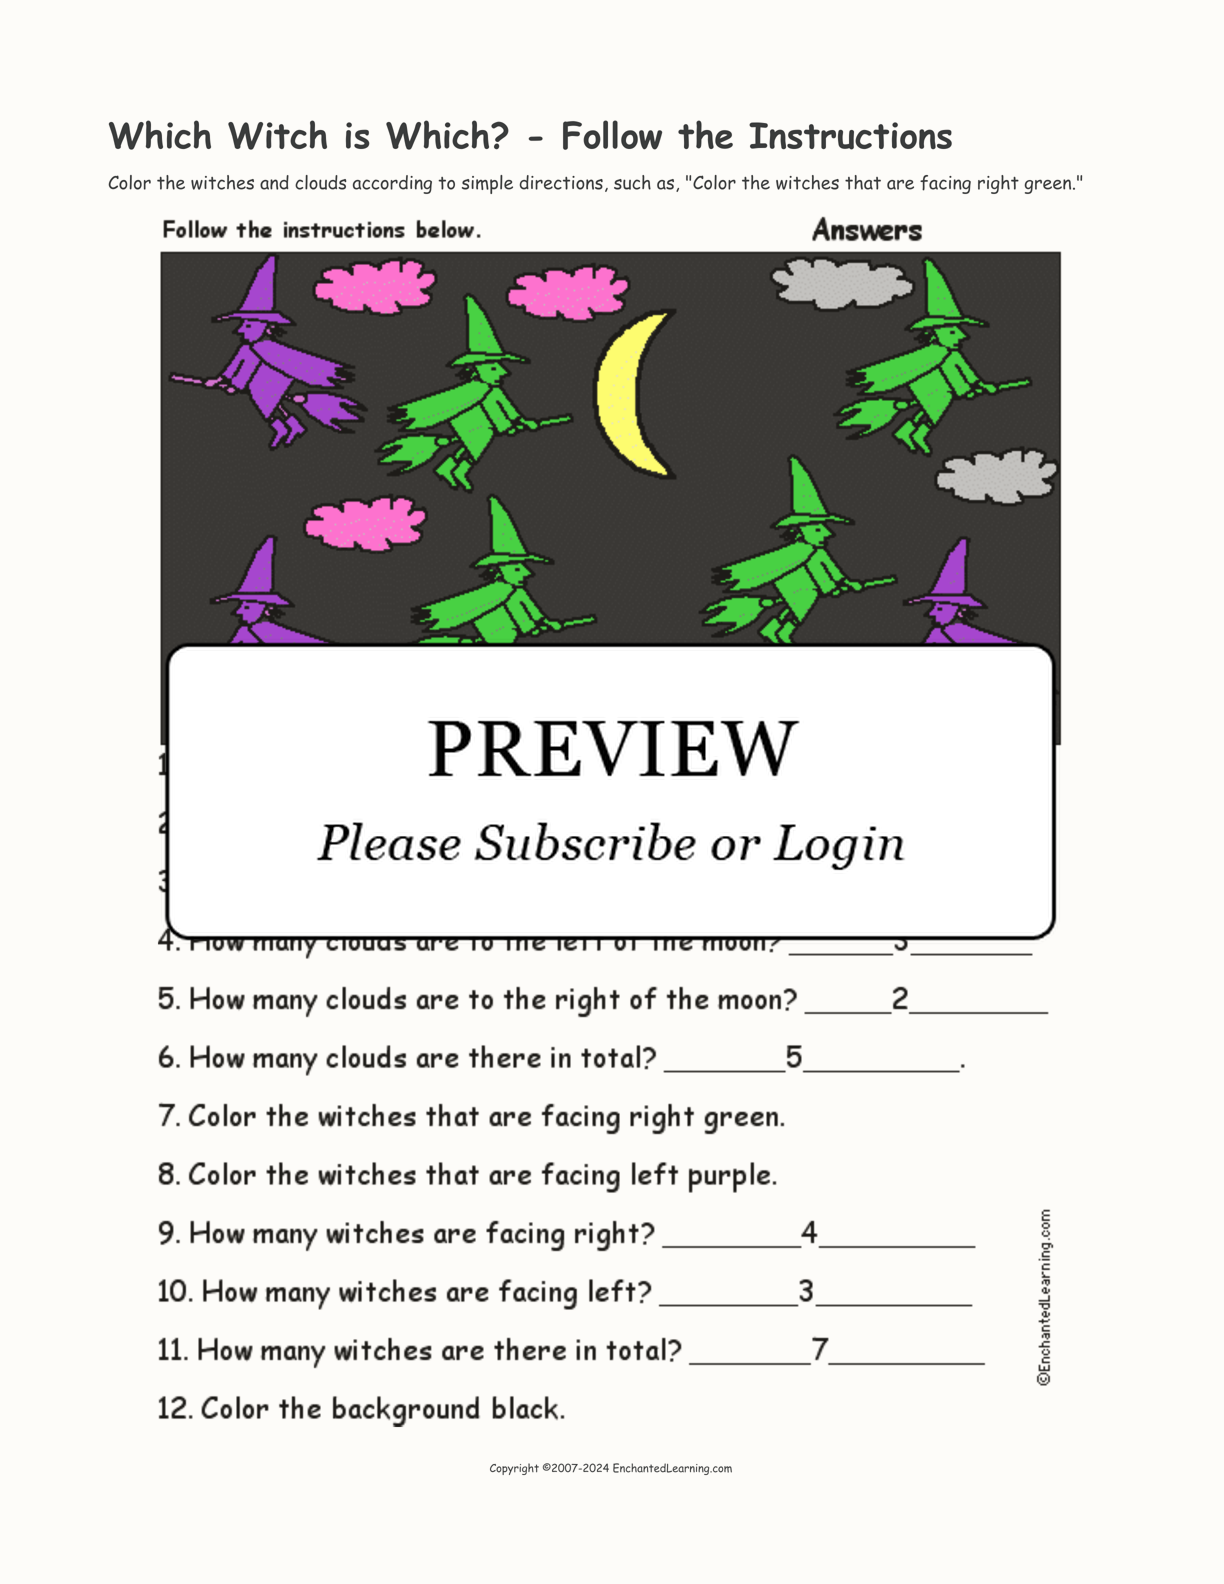 Which Witch is Which? - Follow the Instructions interactive worksheet page 2